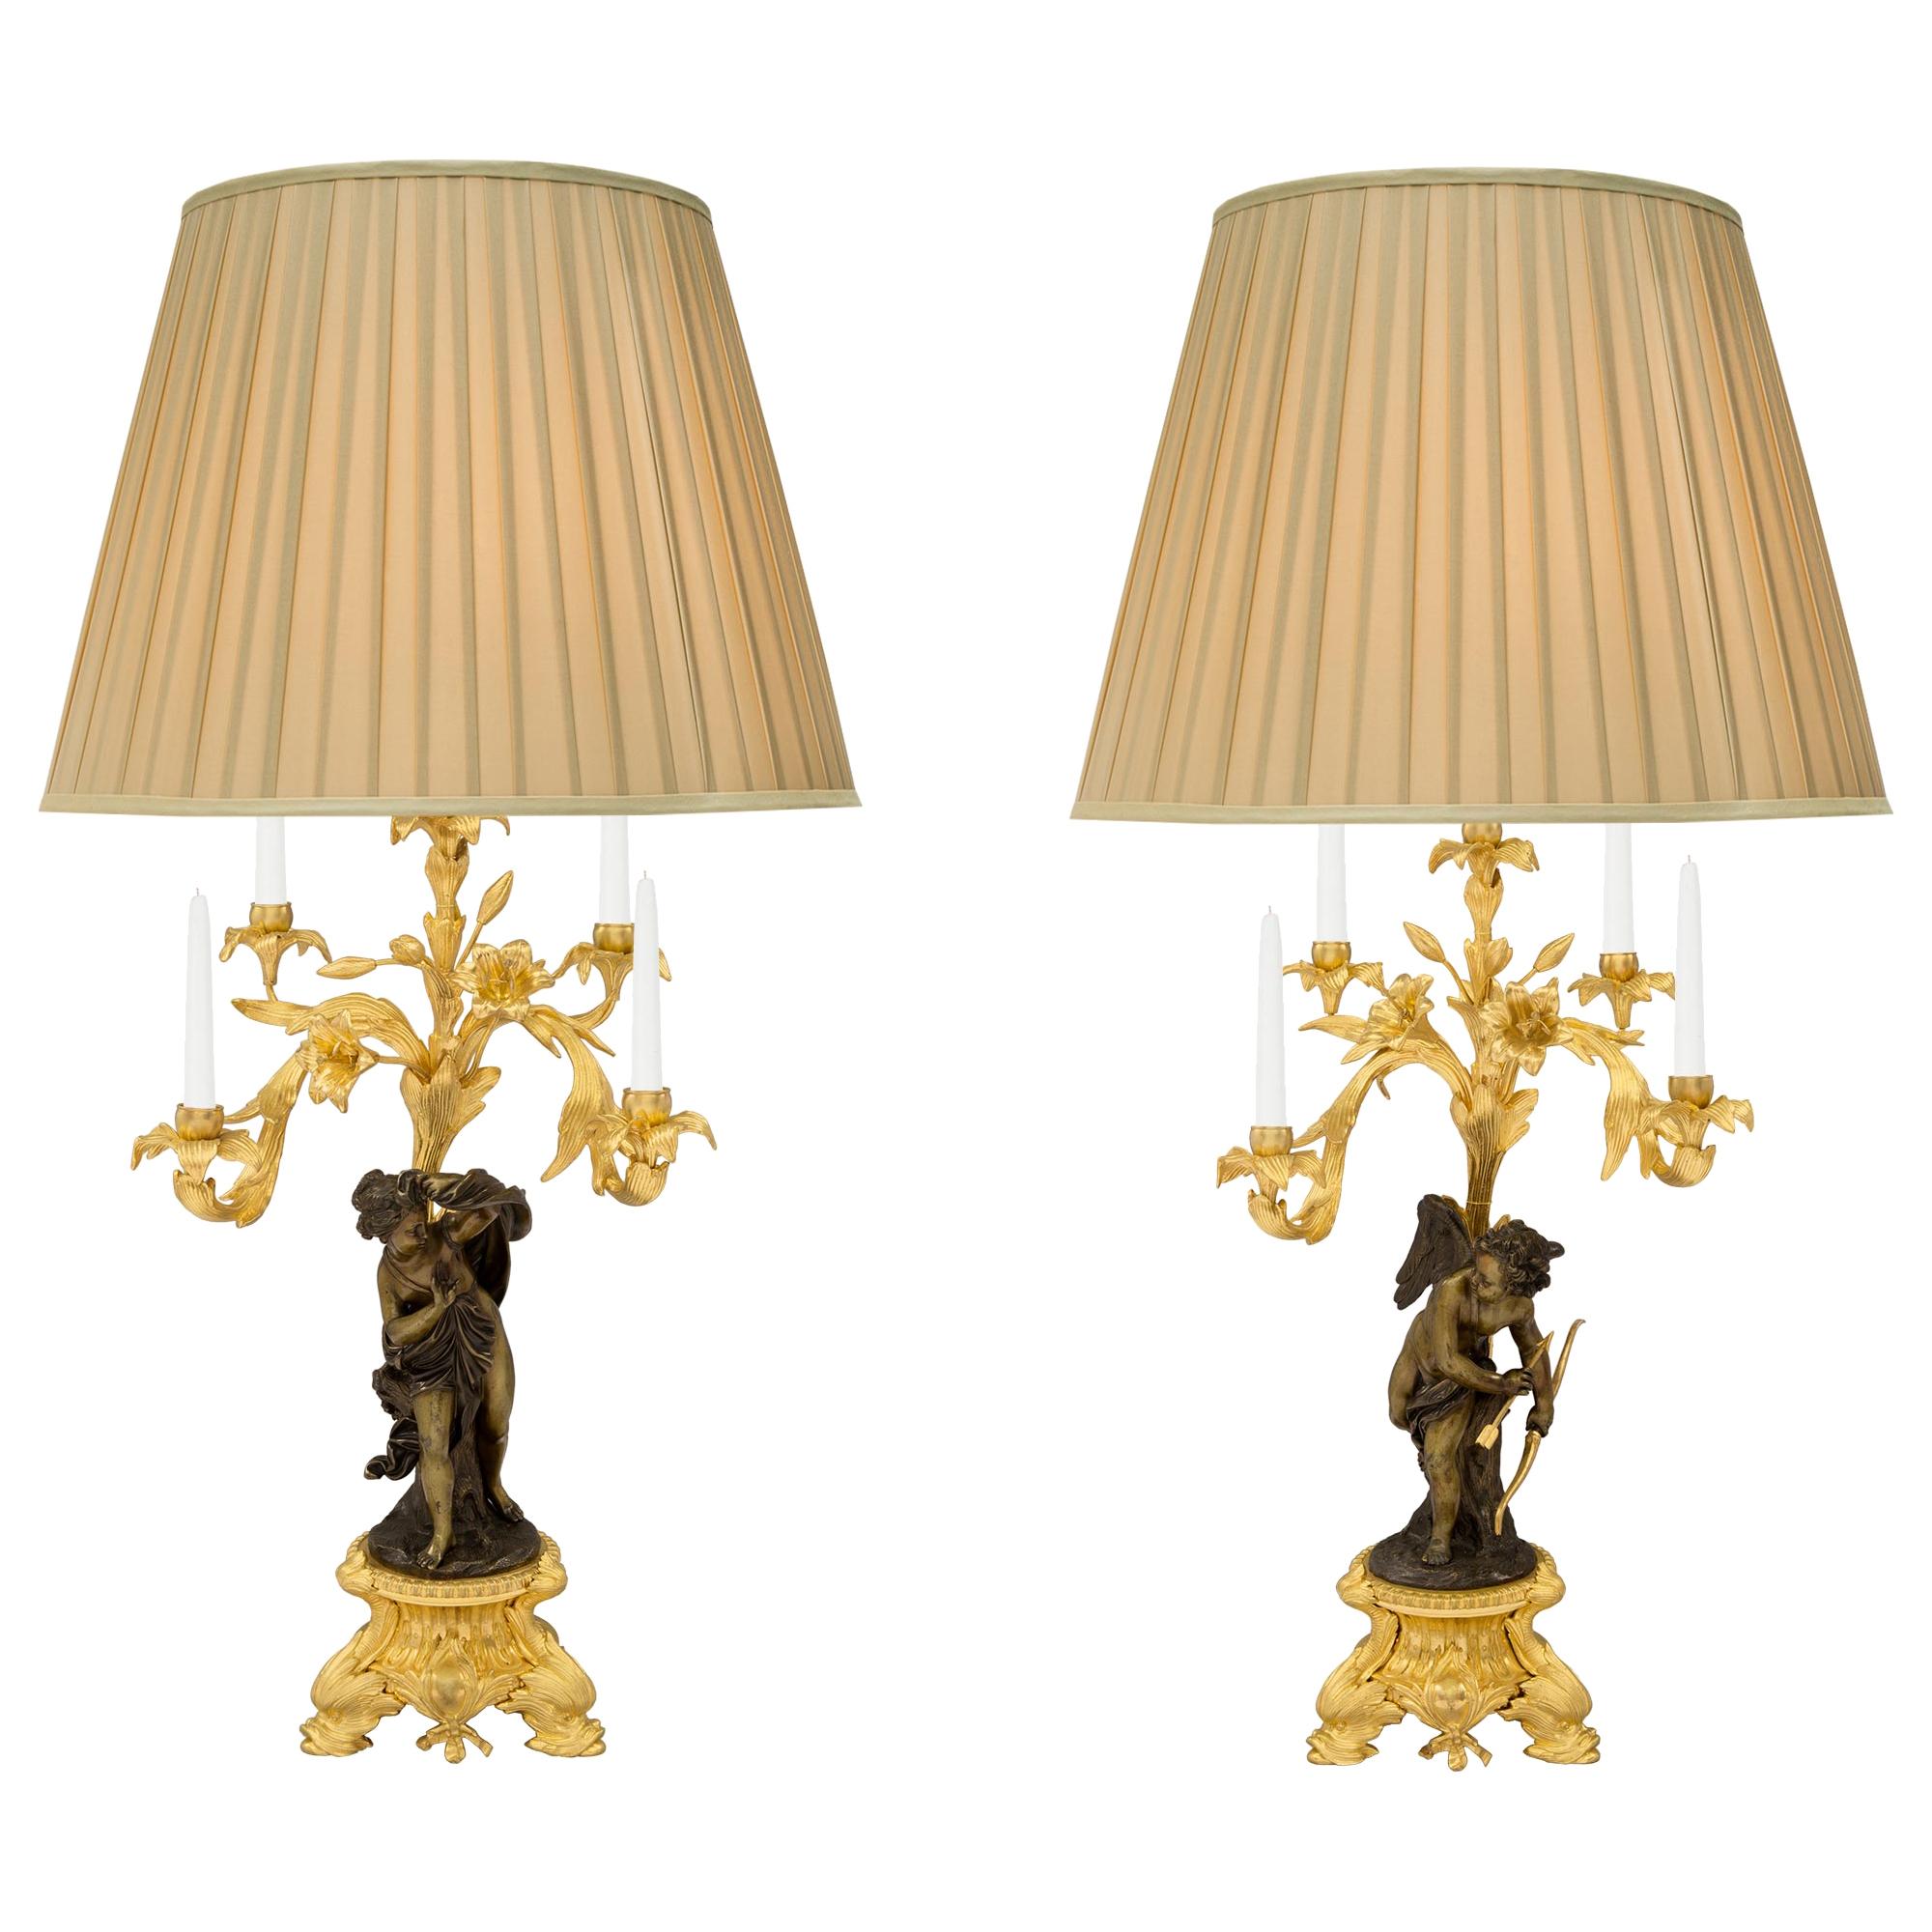 Pair of French 19th Century Belle Époque Period Bronze Lamps Picard Attributed